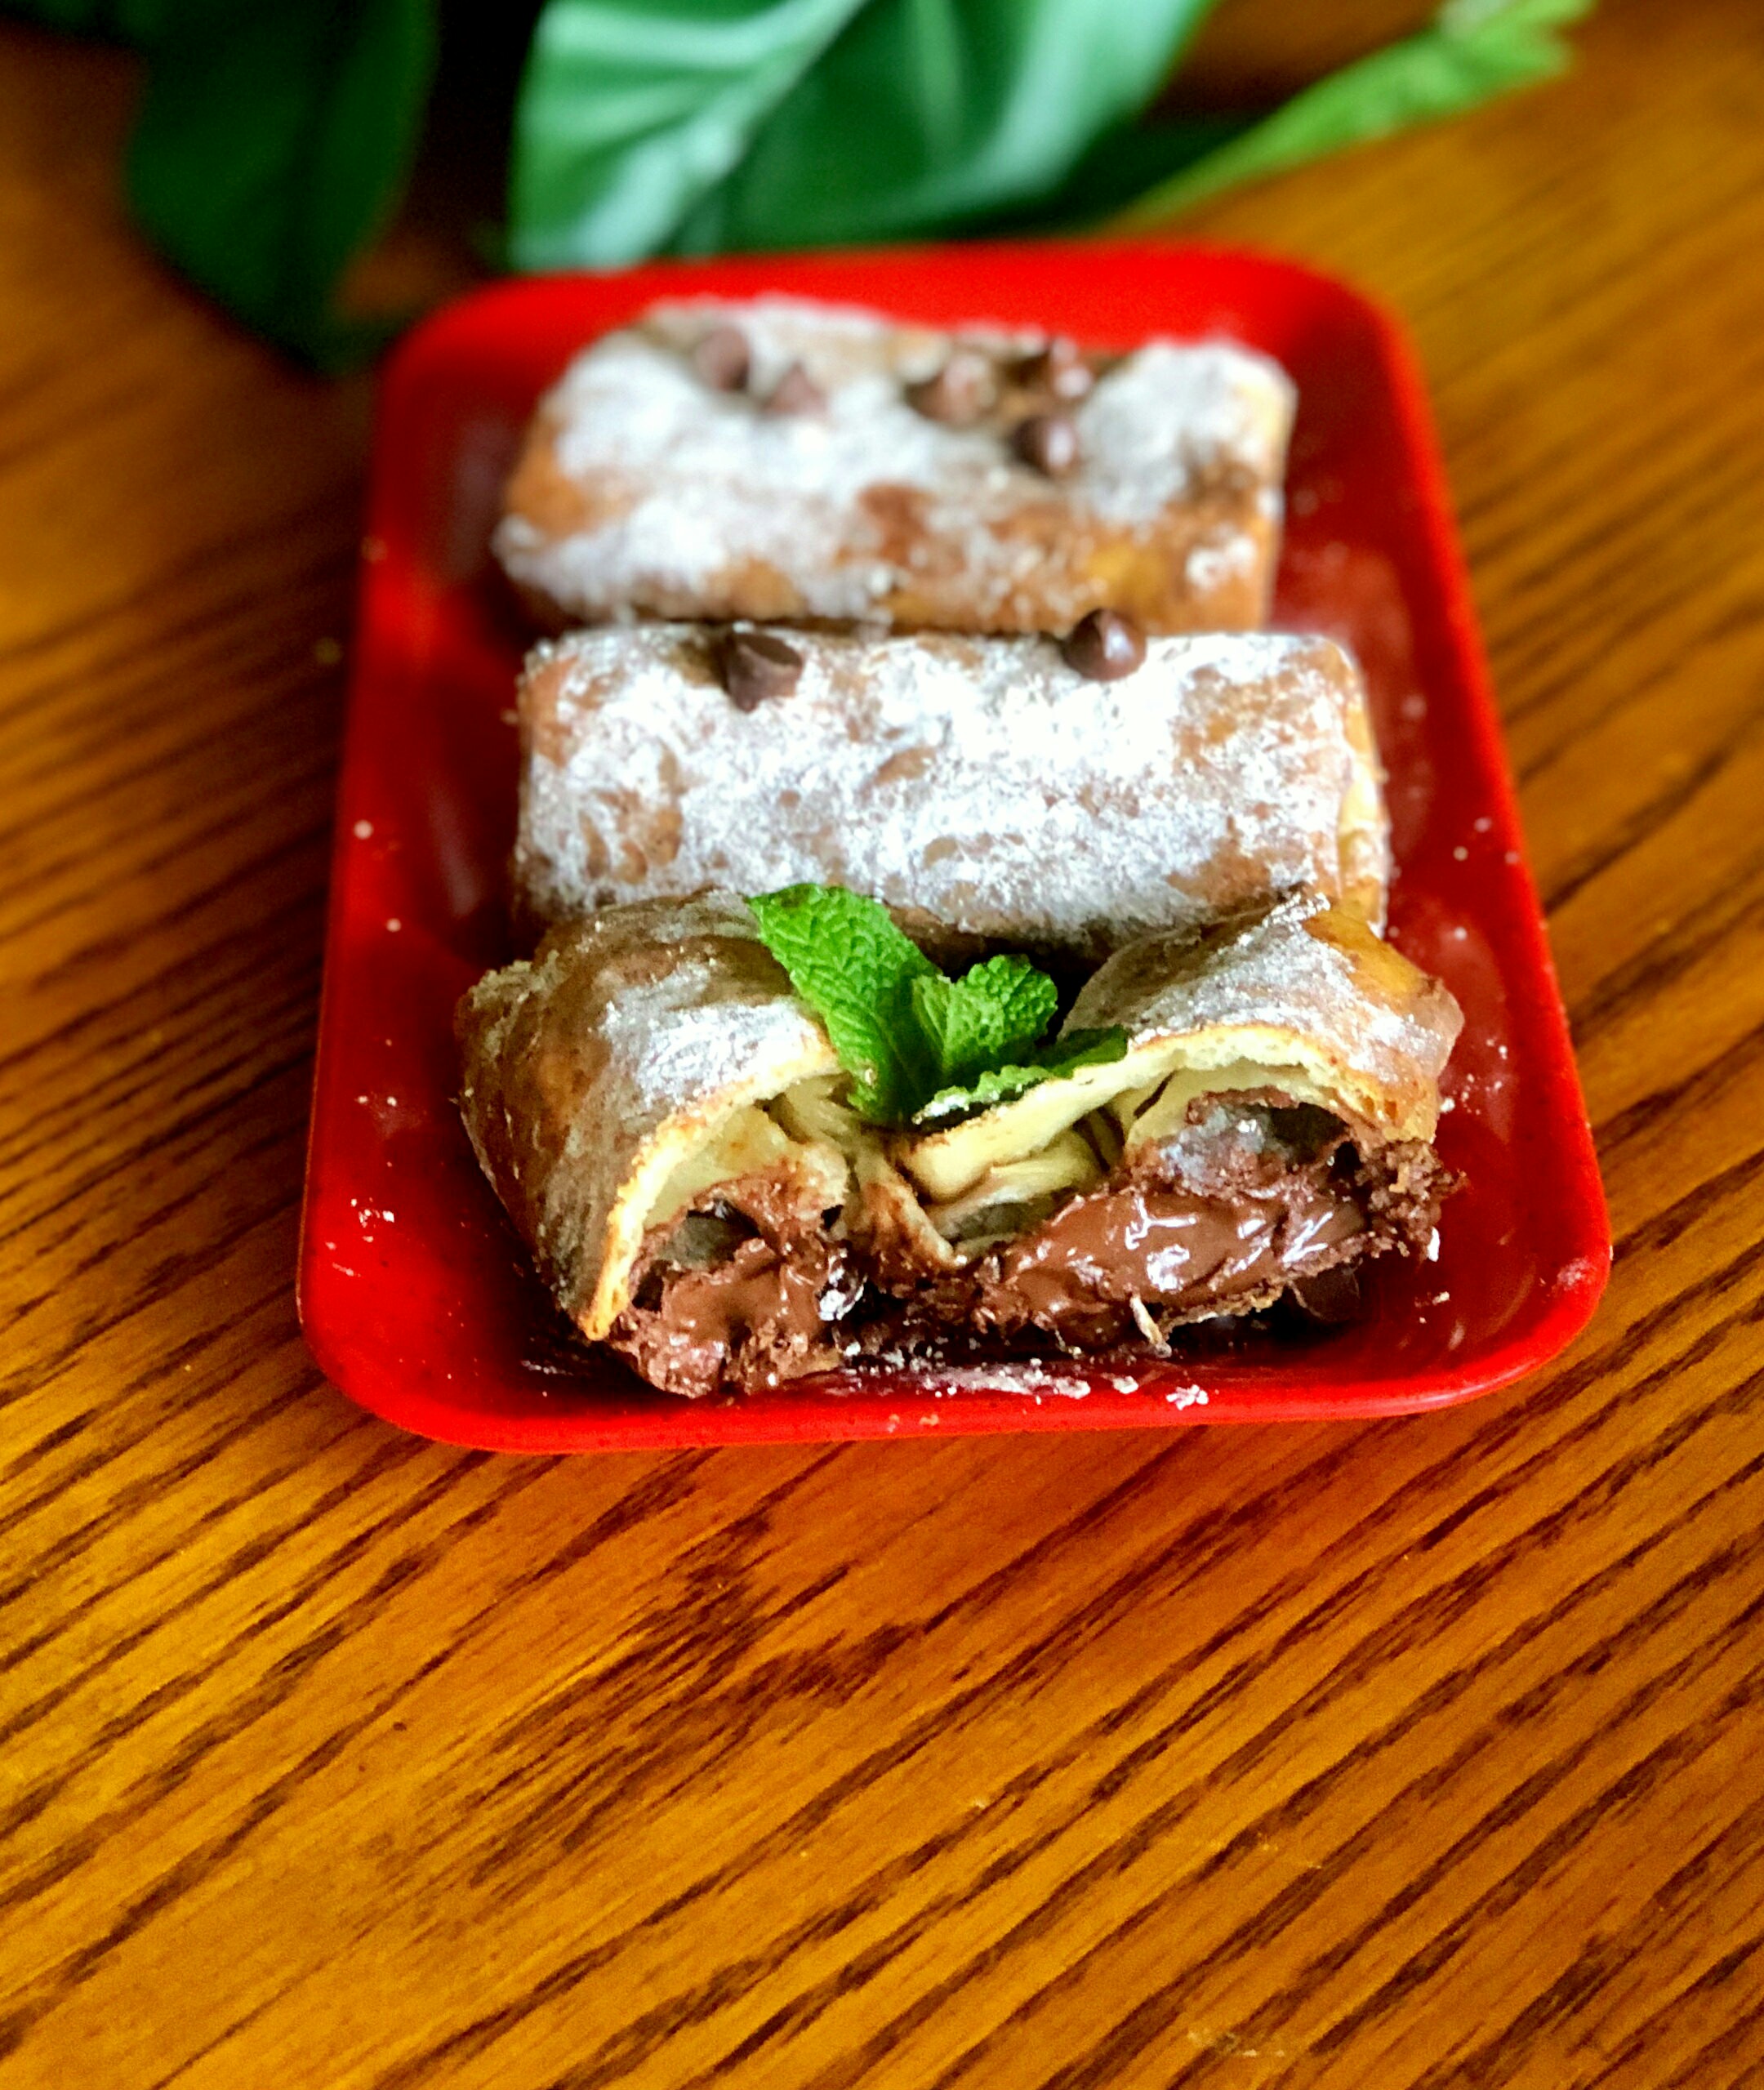 Chocolate Chimichangas to Die For!